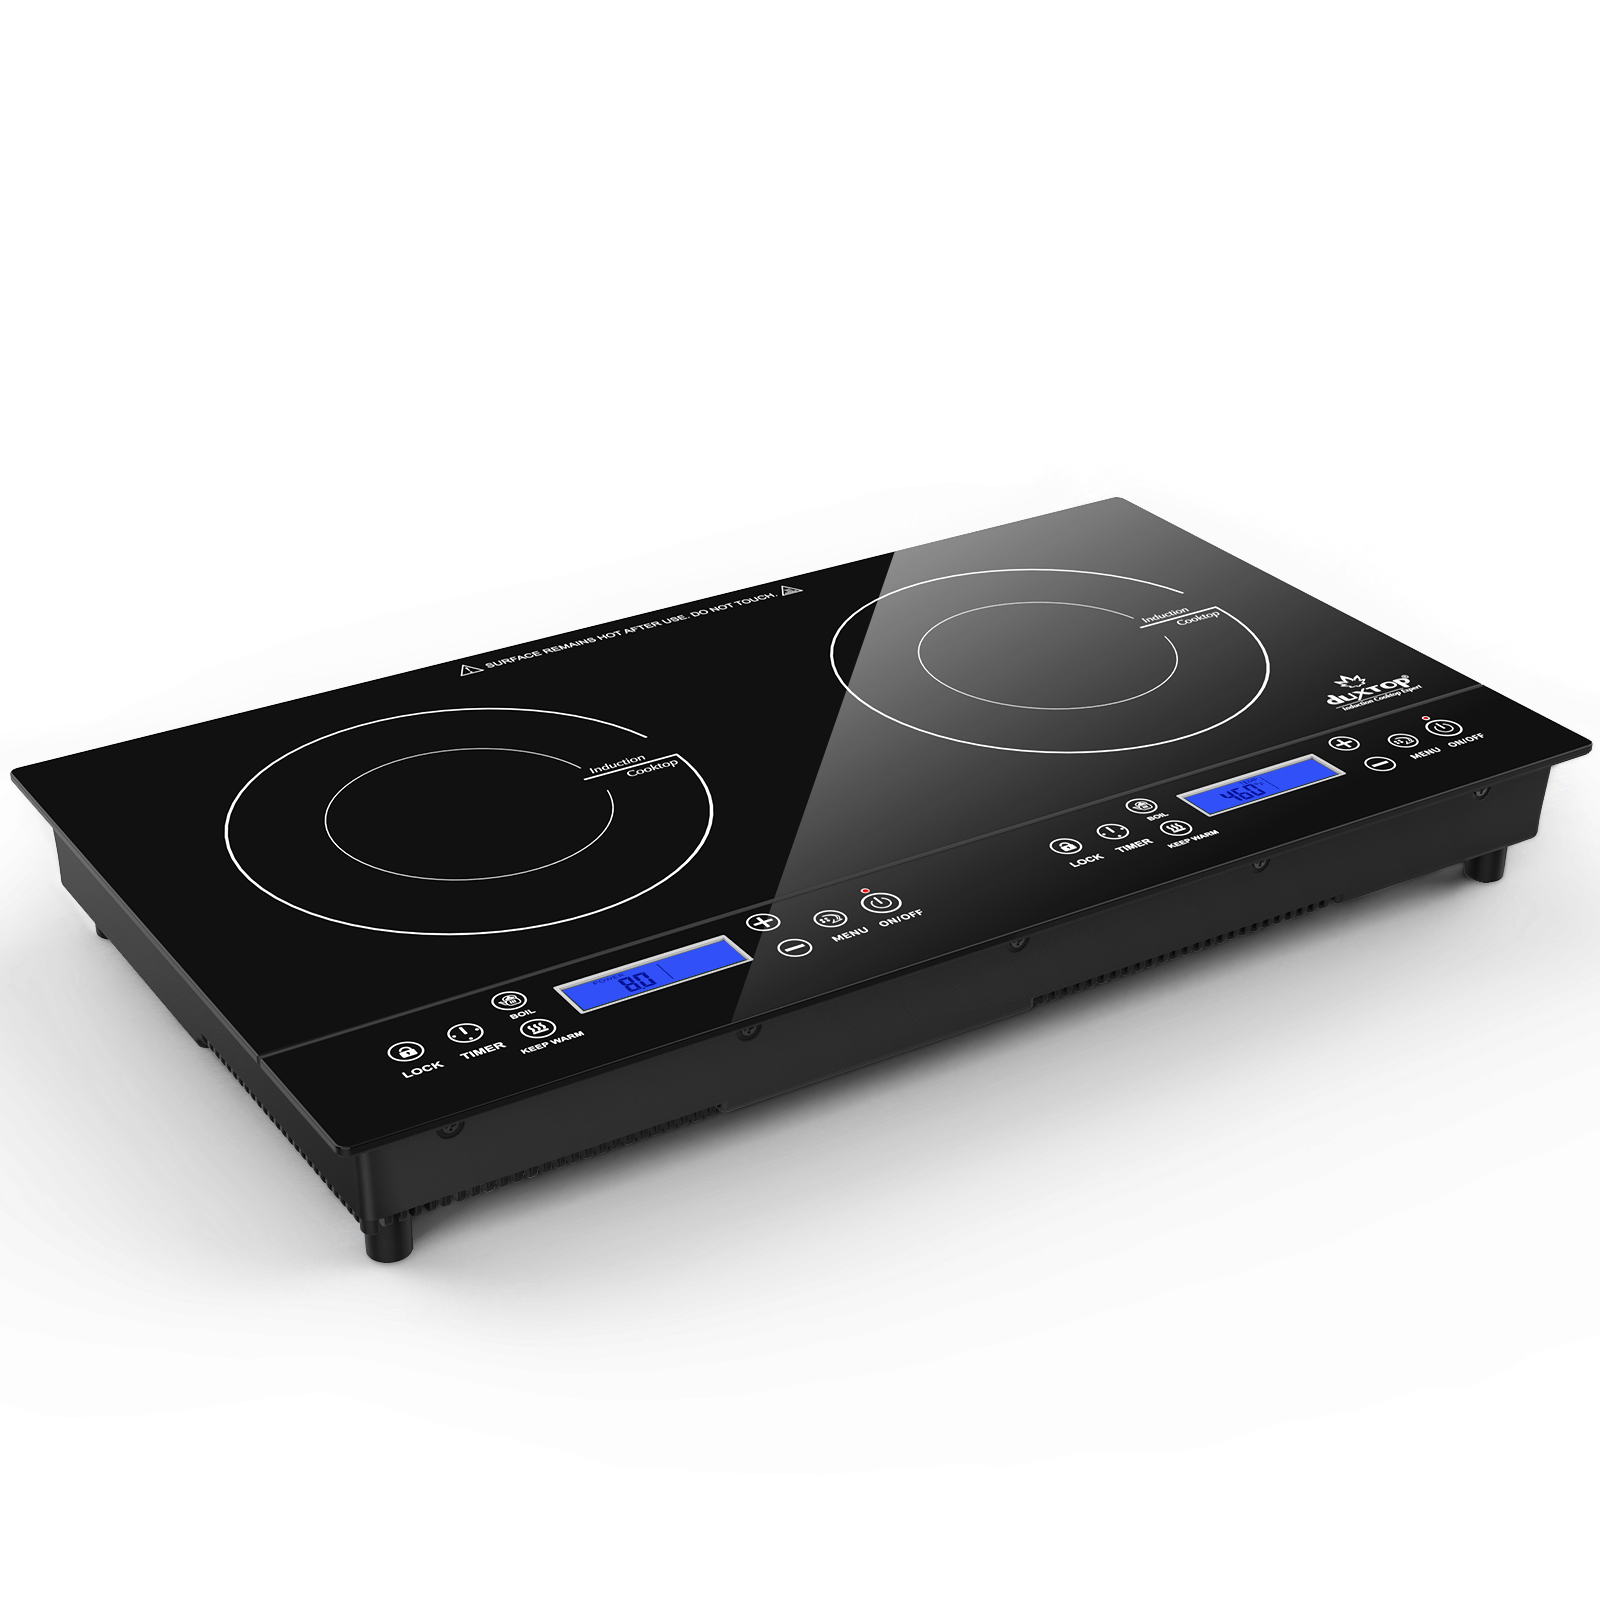 Duxtop Portable Induction Cooktop Countertop Burner Induction Hot Plat Portable  Cooktop With 2 Electric Stove Burner For Cooking